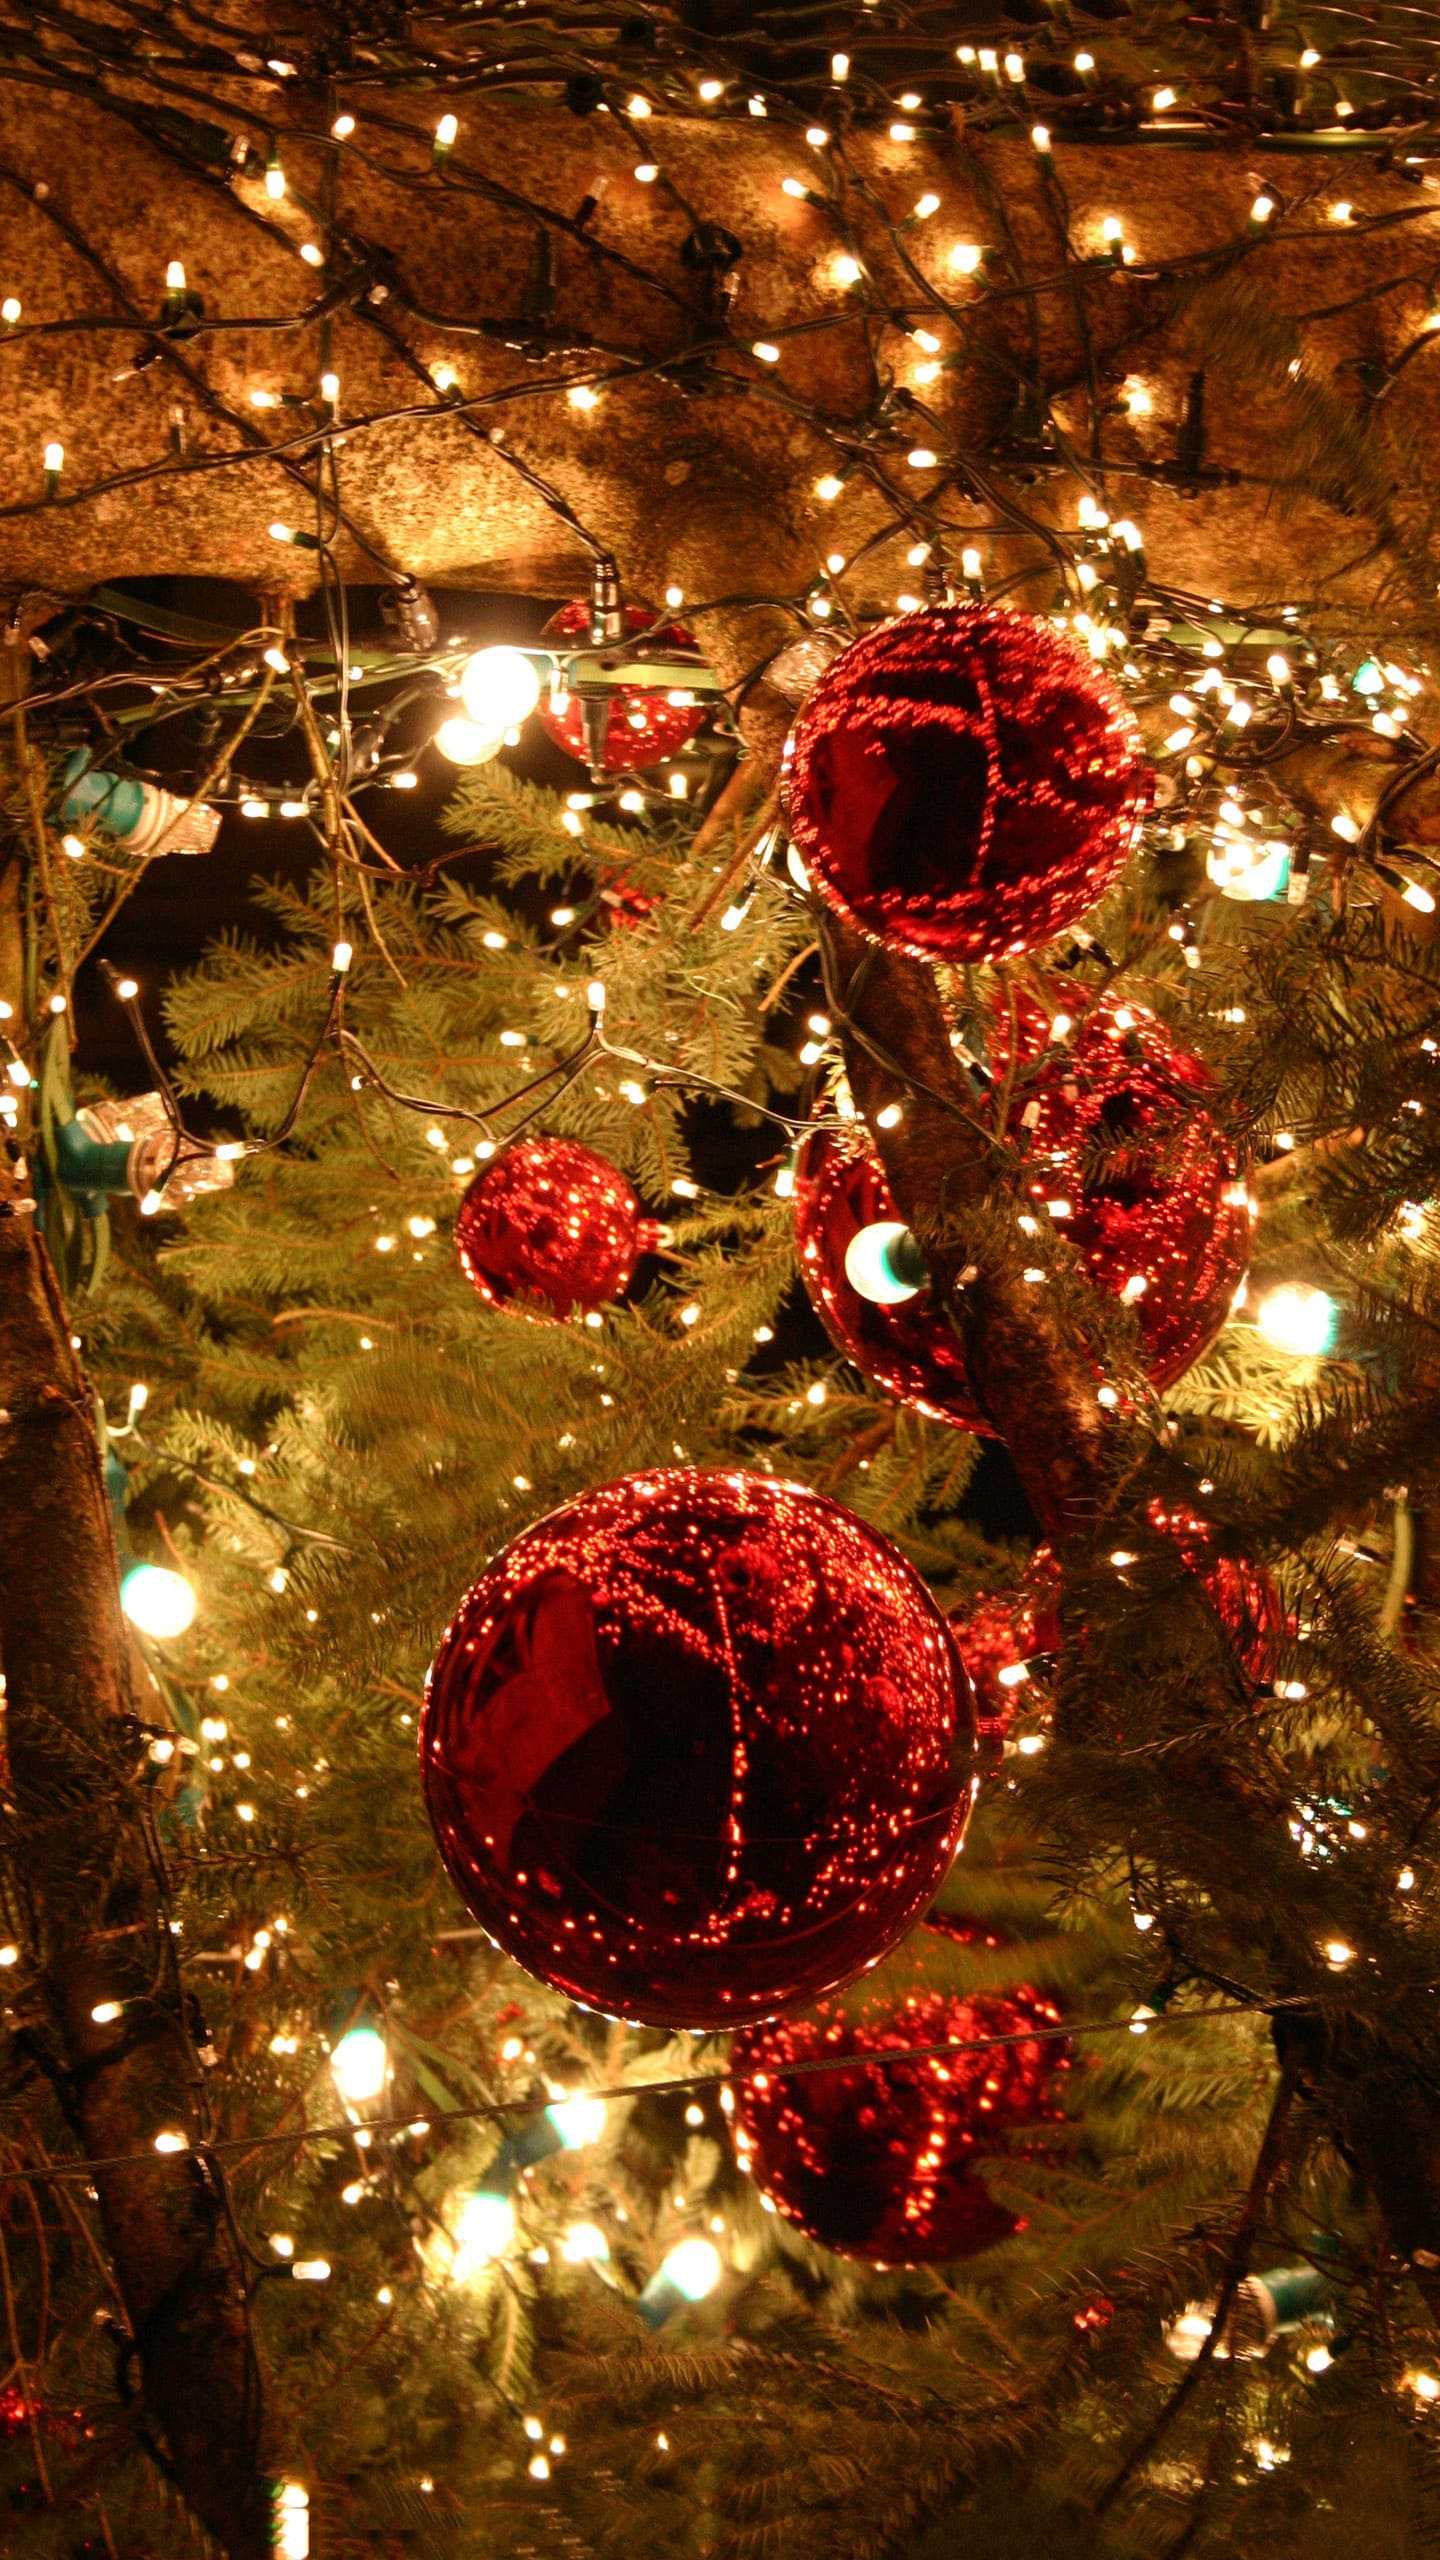 A close up of a Christmas tree with red ornaments and white lights. - Christmas lights